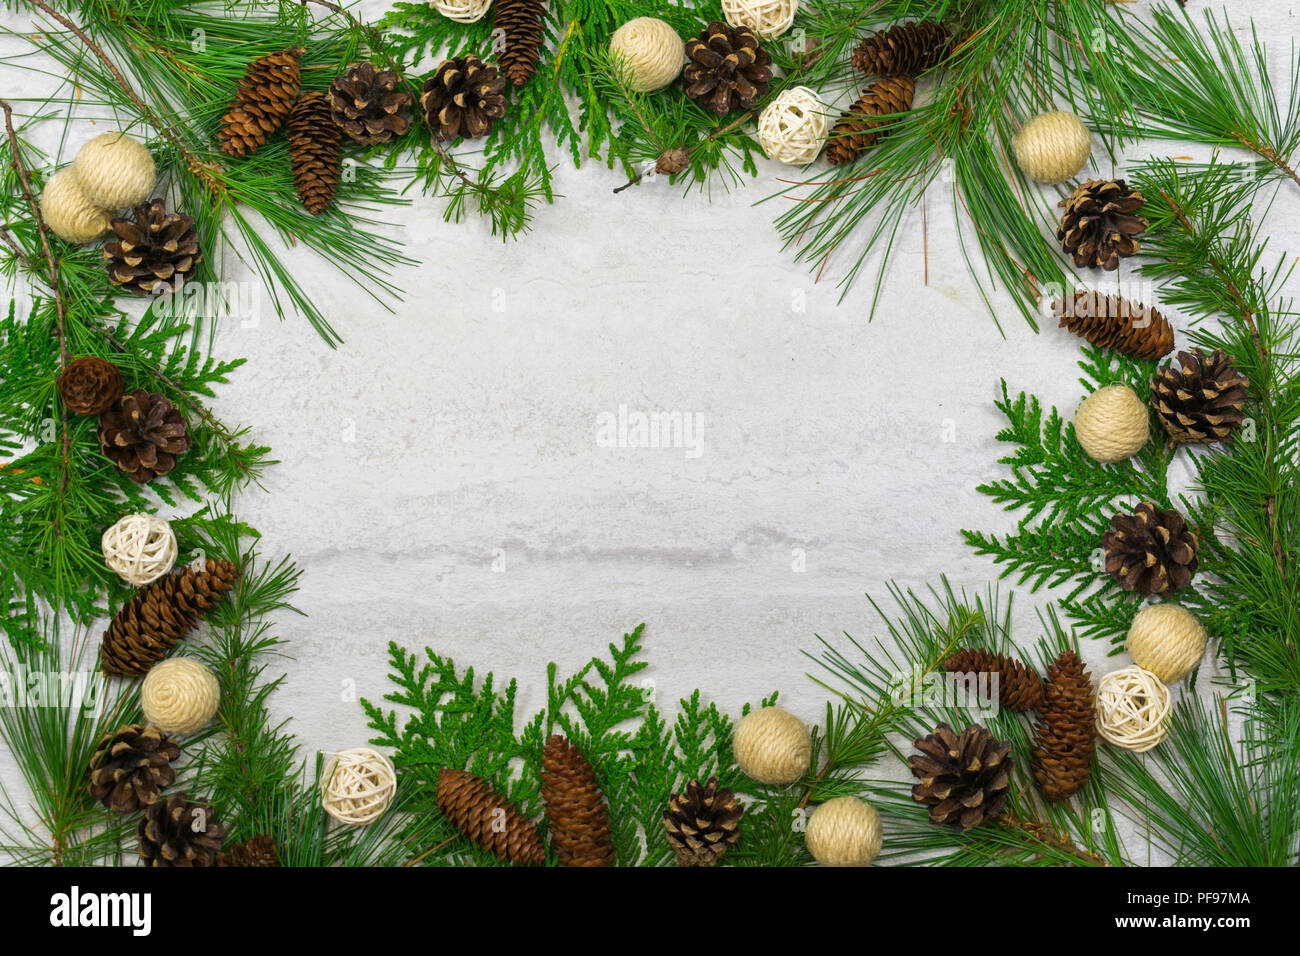 A beautiful border of white pine, tamarack and cedar boughs with pine cones, cinnamon sticks, and balls of twigs and twine Stock Photo